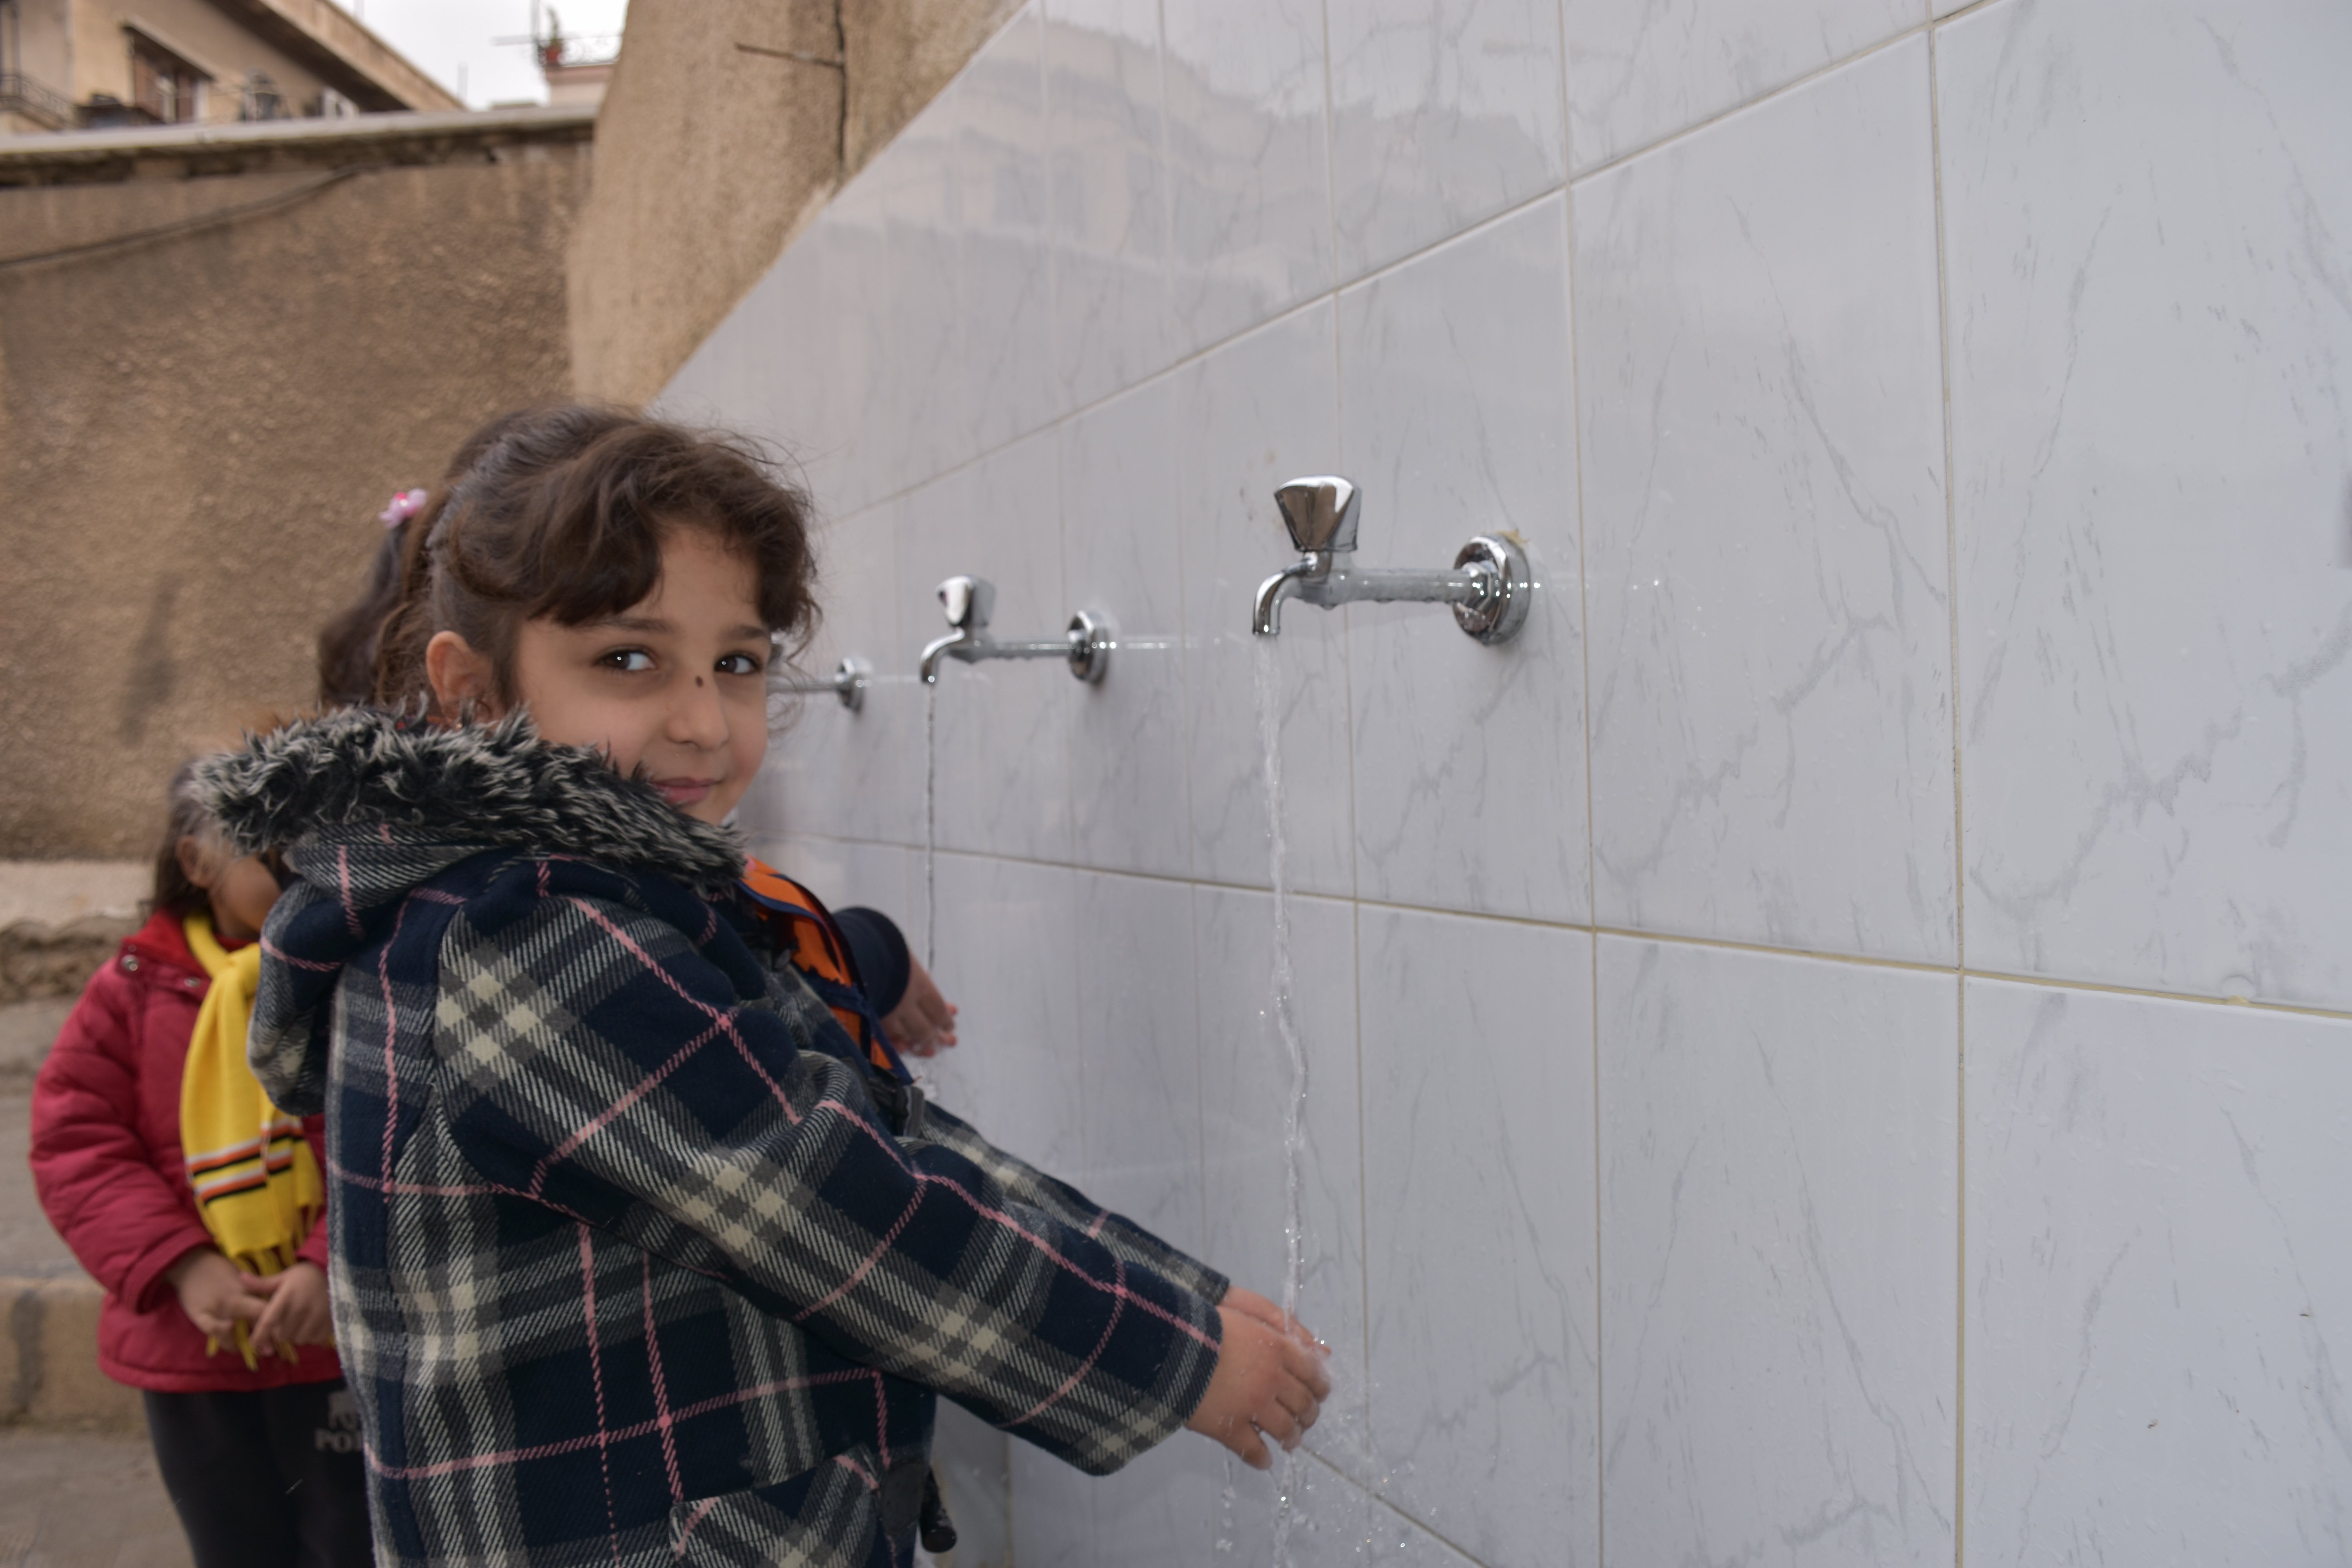 Oxfam rehabilitated the water networks and toilets of schools in Damascus that decided to resume class. Through these efforts, children have access to safe, clean water, and the public health risks associated with poor sanitation and waterborne diseases are reduced. ‘I always avoided using the toilets at school. They used to be smelly and always wet, but not anymore,’ Noura, 7, tells Oxfam. (Photo: Dania Kareh / Oxfam)